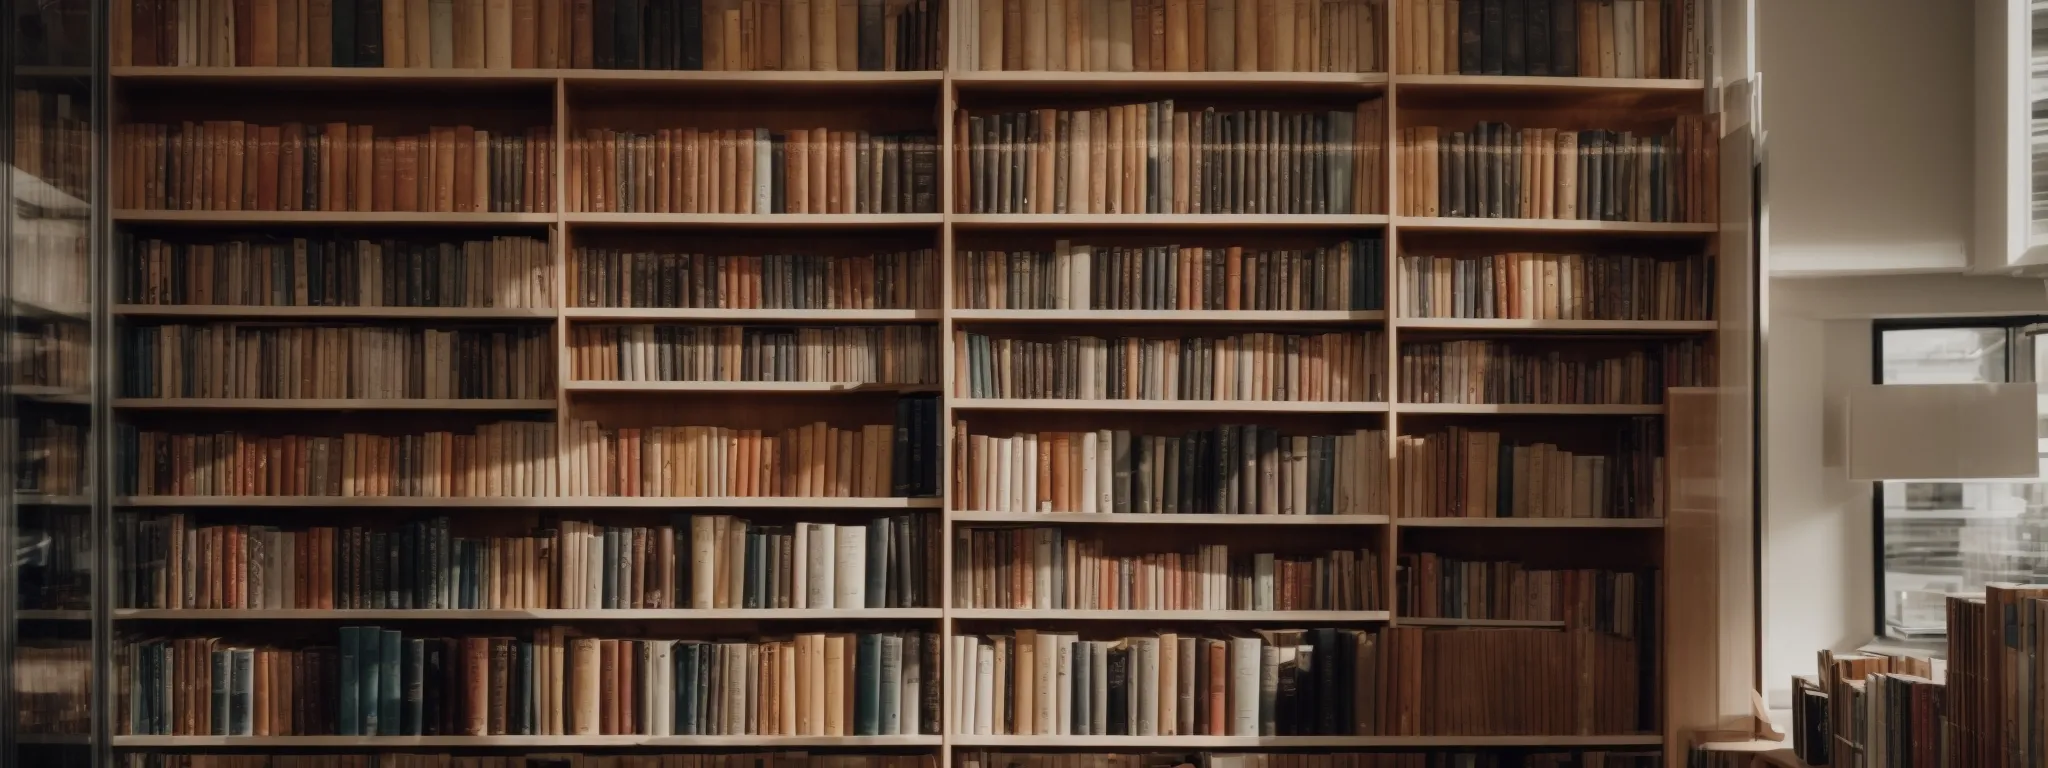 a neatly organized library where books are categorized and meticulously arranged on shelves.